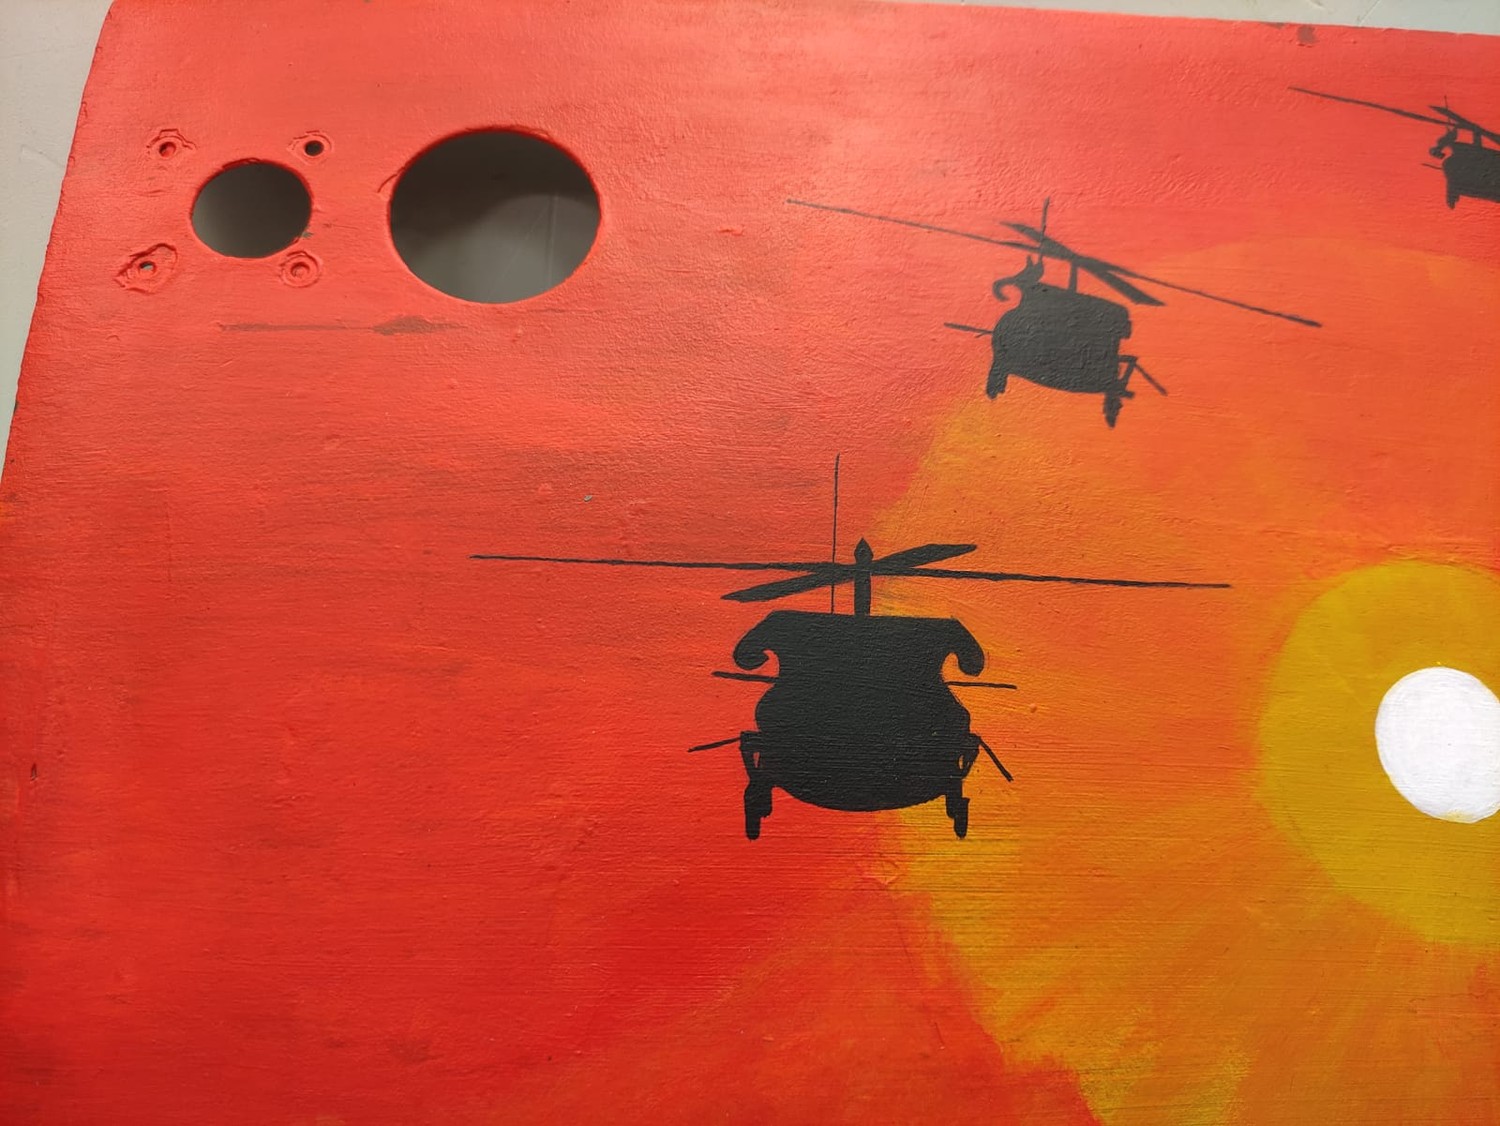 Genuine Vietnam Era Bell Huey UH-1 Helicopter Fragment with post war memorial painting - Image 4 of 5